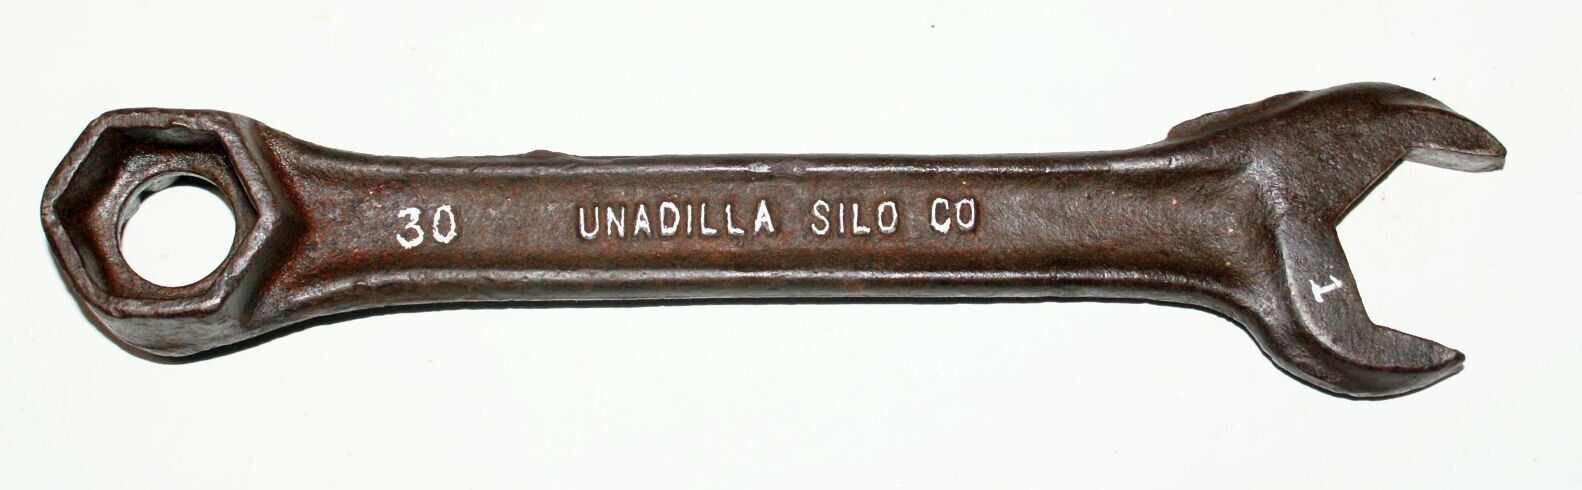 Old Vintage 30 UNADILLA SILO CO Farm implement wrench Tool NY 1